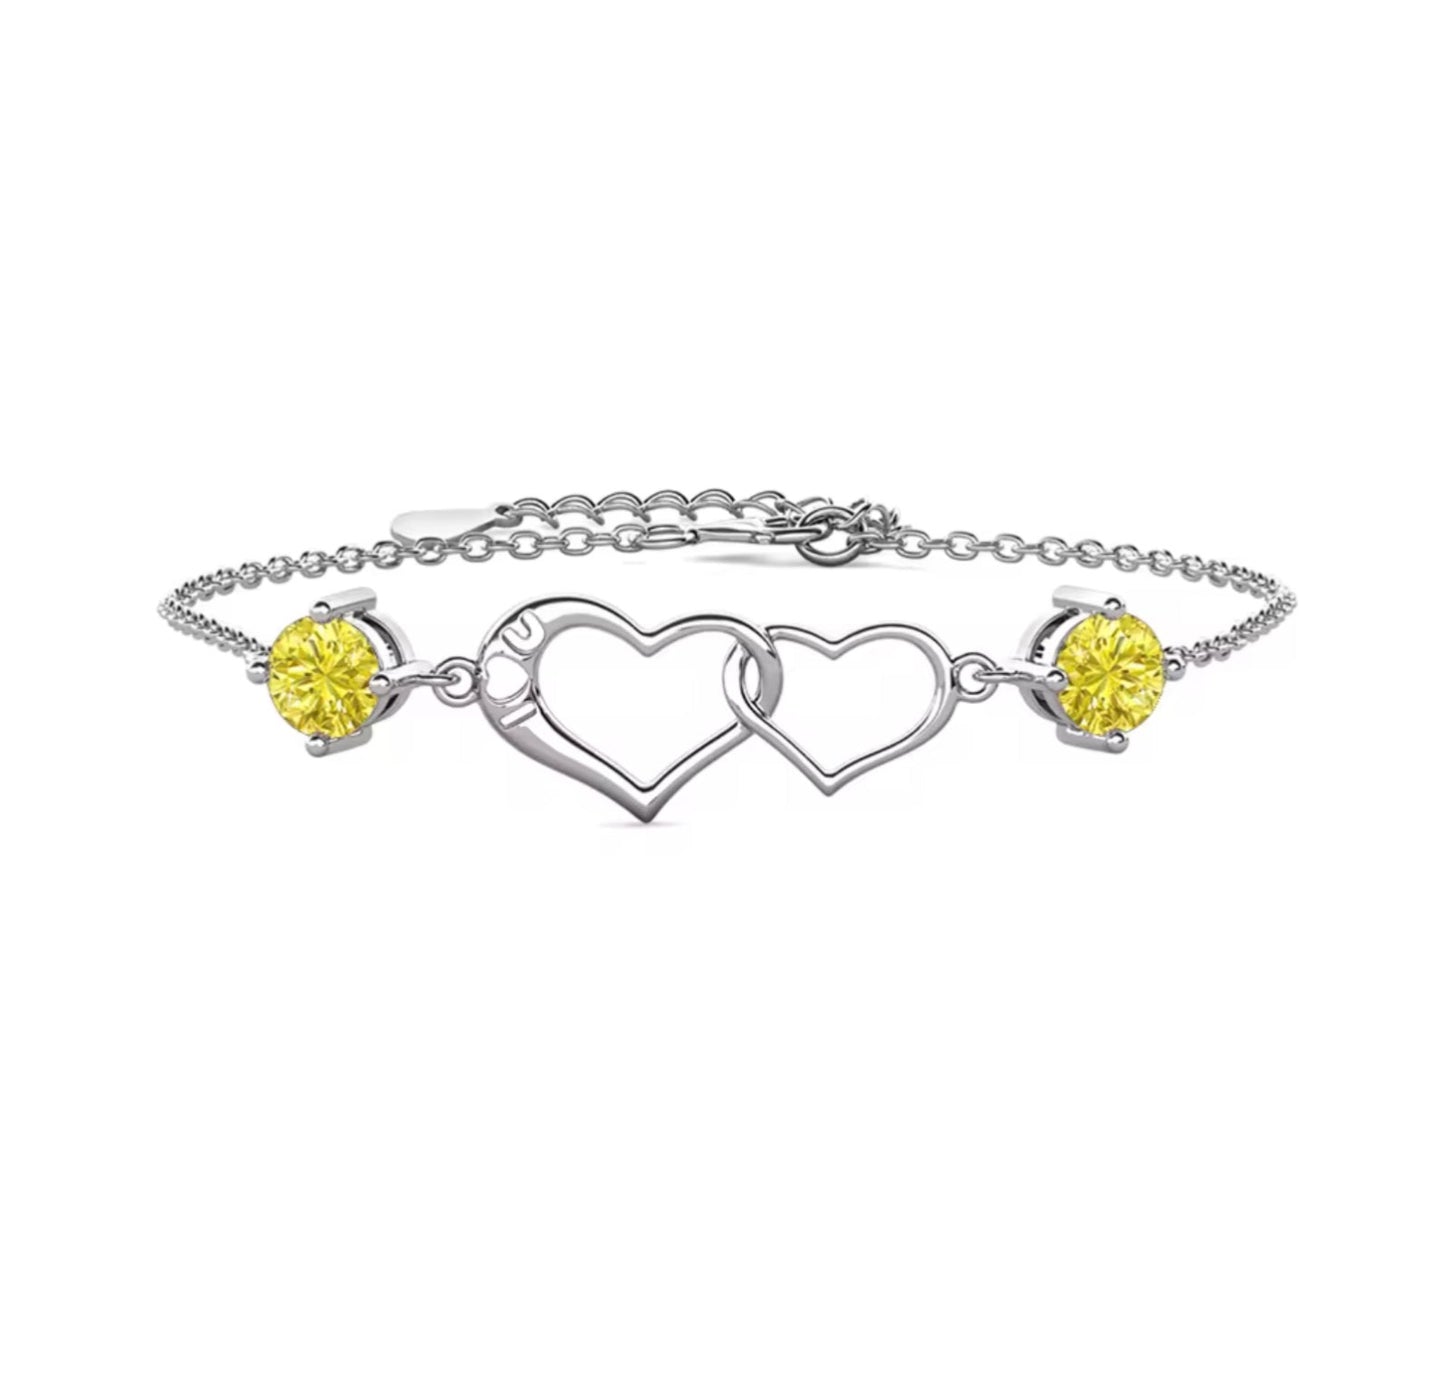 Heart motif bracelet in a variety of colors